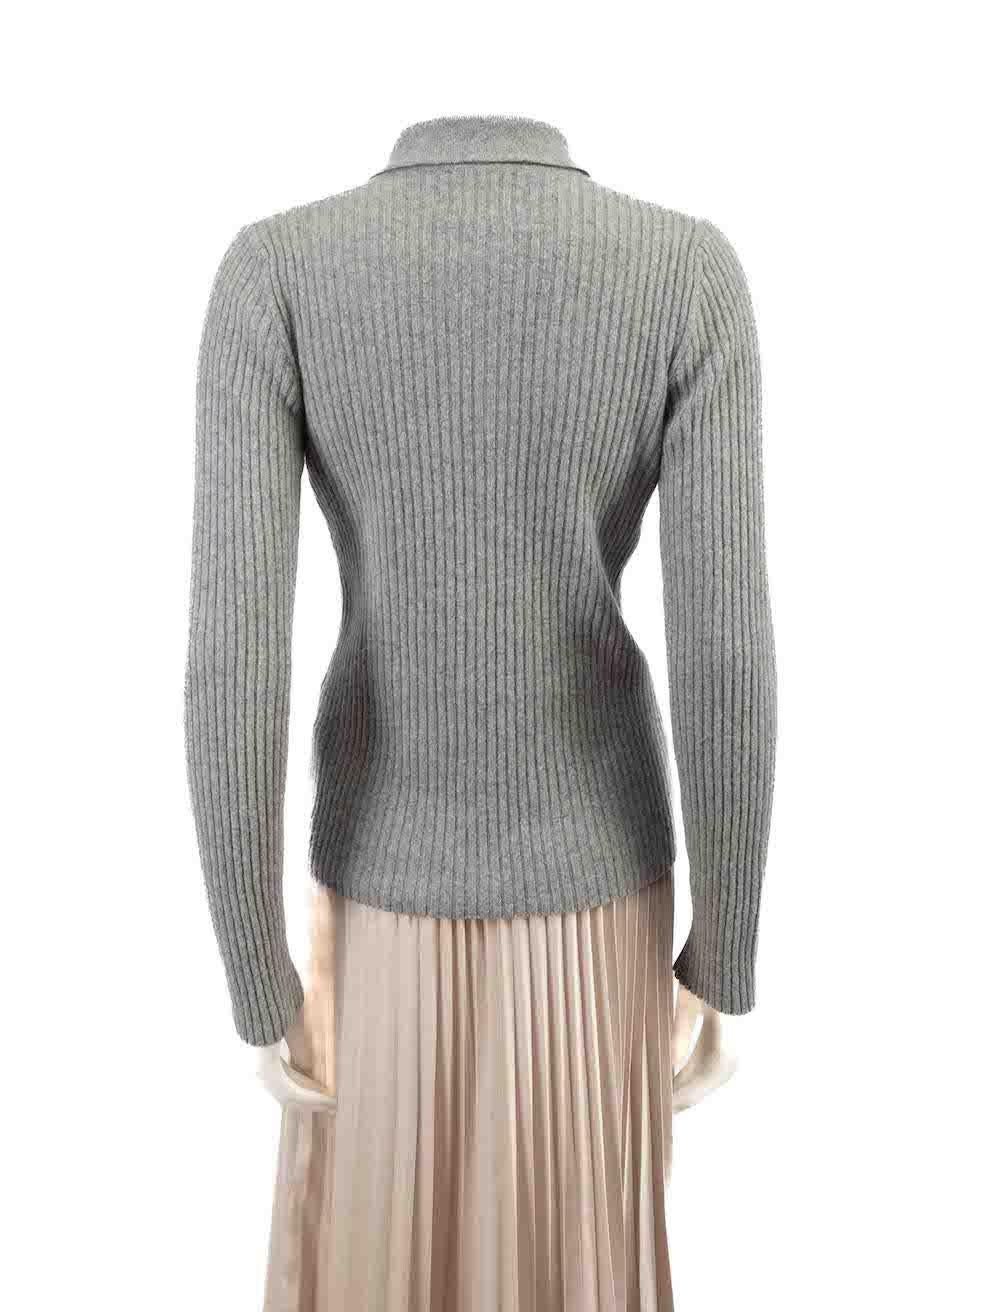 Ganni Grey Embellished Button Knit Jumper Size M In Good Condition For Sale In London, GB